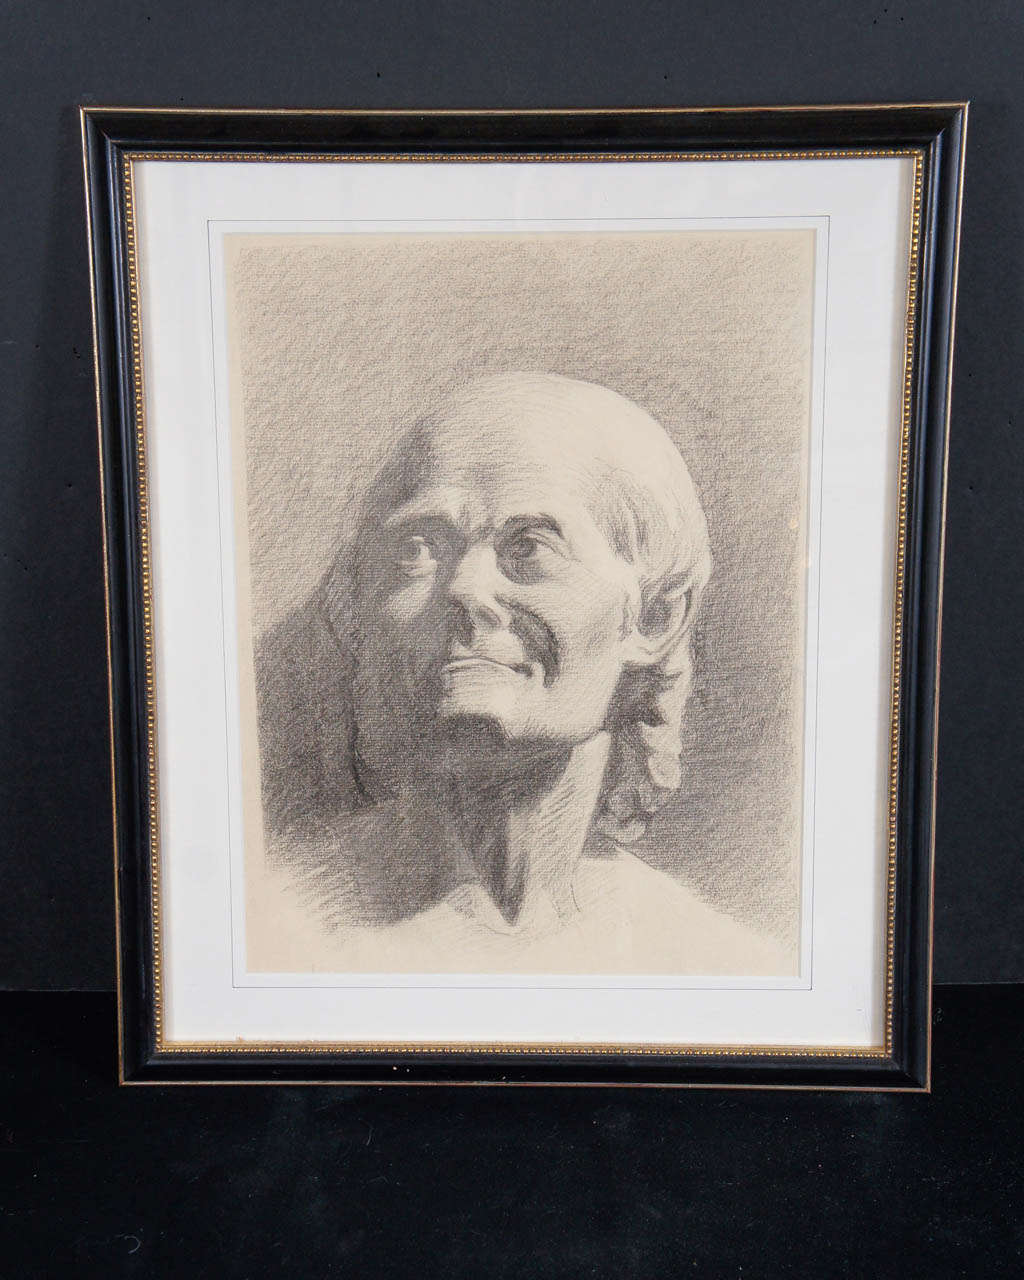 This finely rendered work showing  Francois-Marie Arouet also know as Voltaire is from the late 19th century. The drawing in a vintage frame shows the sitter in a somewhat relaxed pose and is probably taken from one of two versions of the famous